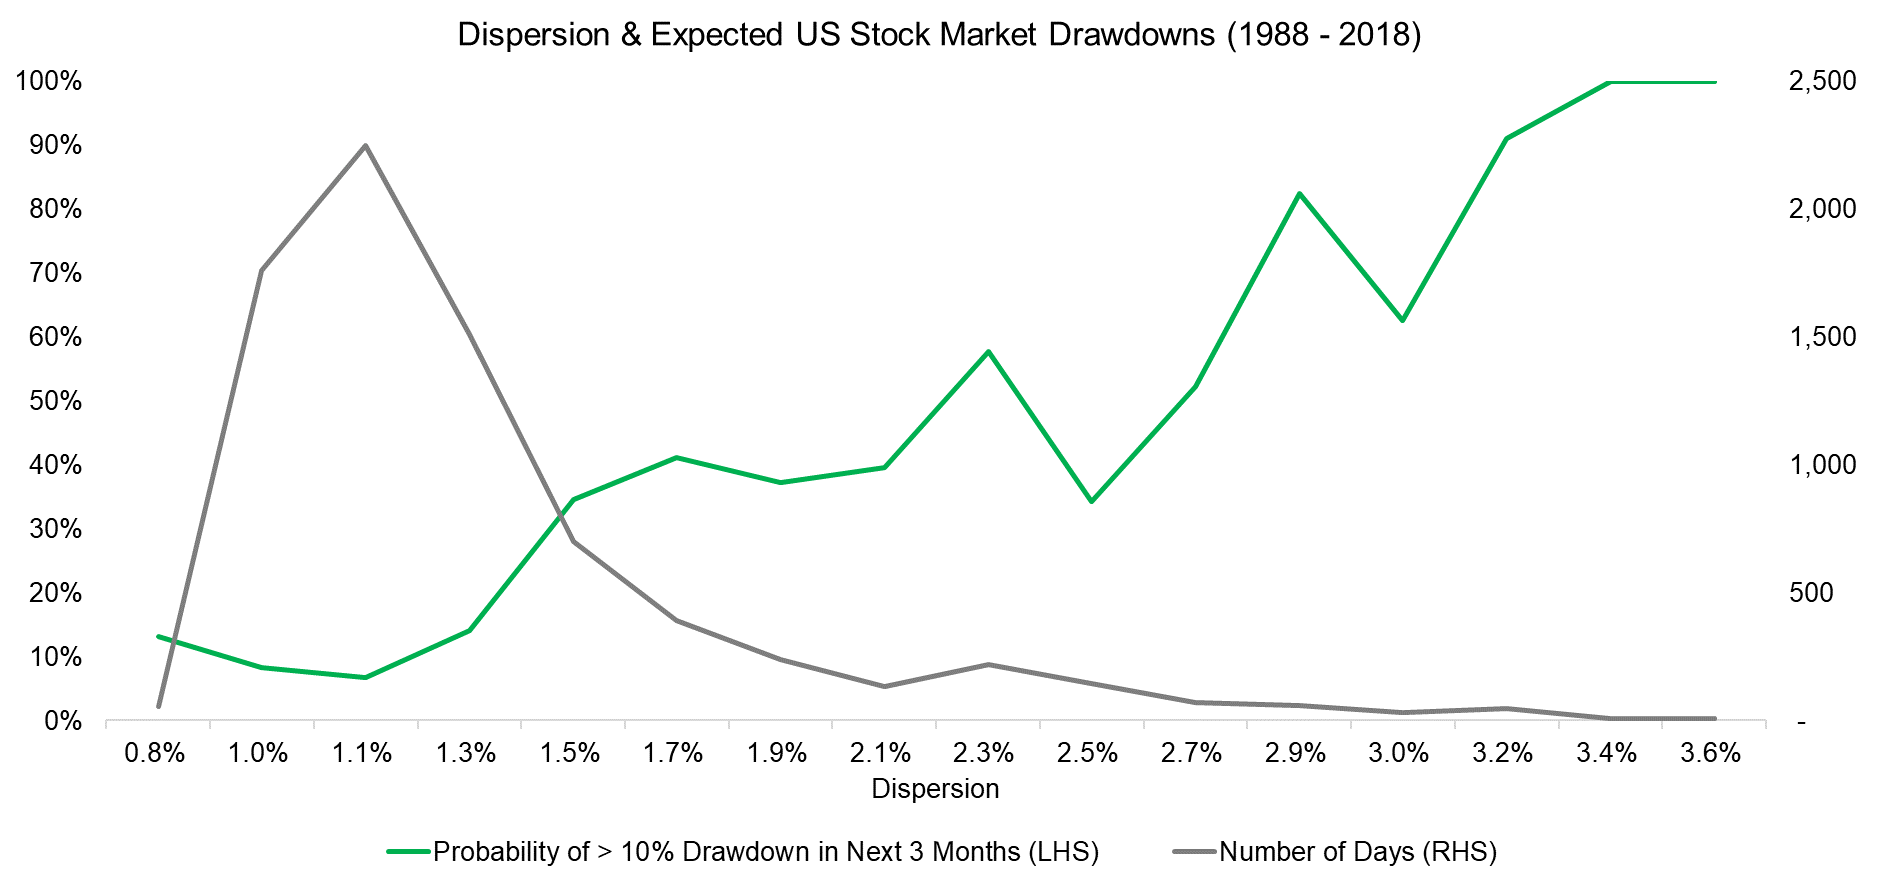 Dispersion & Expected US Stock Market Drawdowns (1988 - 2018)